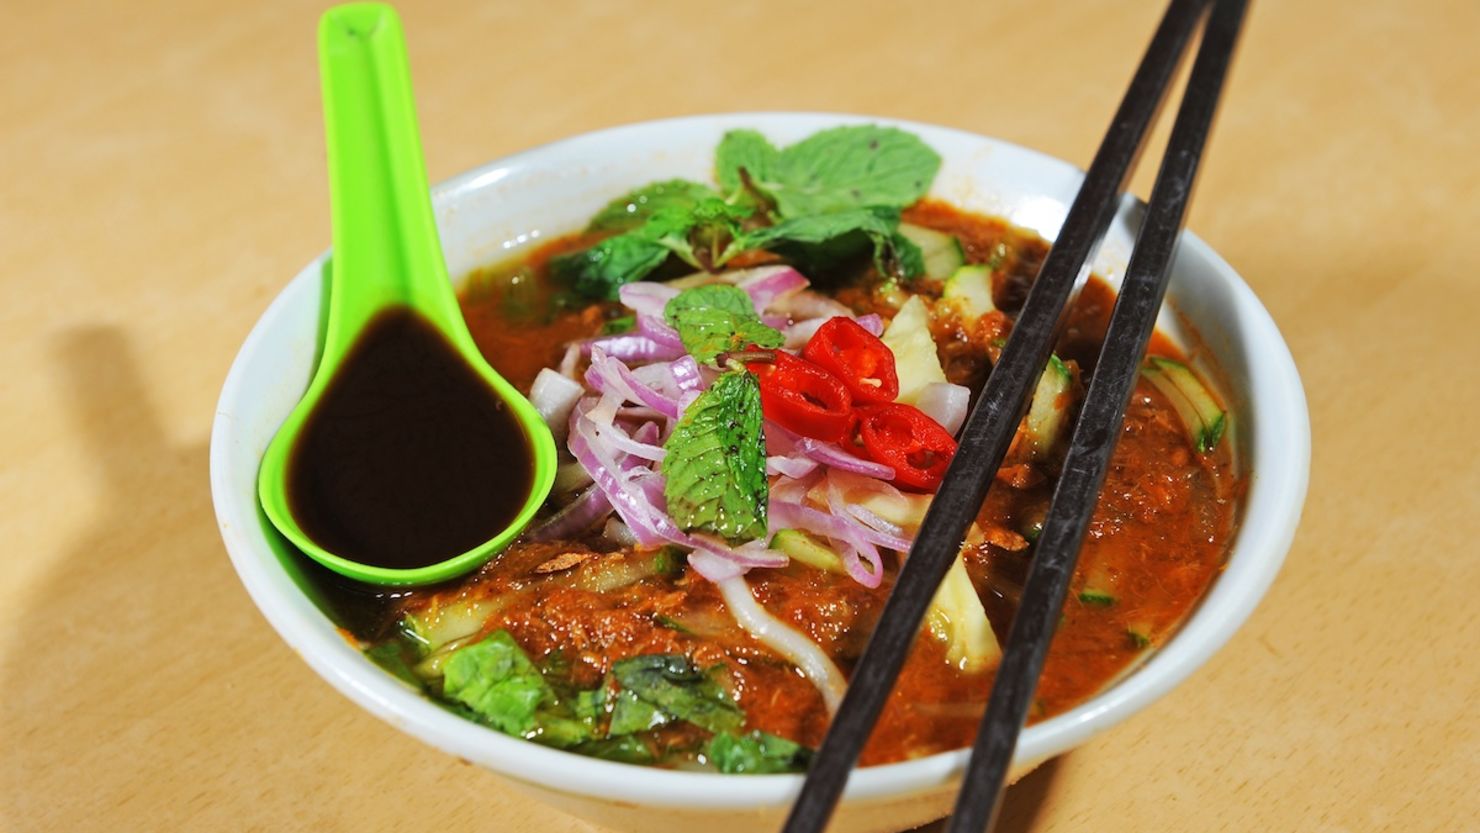 A staple of Malaysian cuisine, laksa comes in multiple forms. 